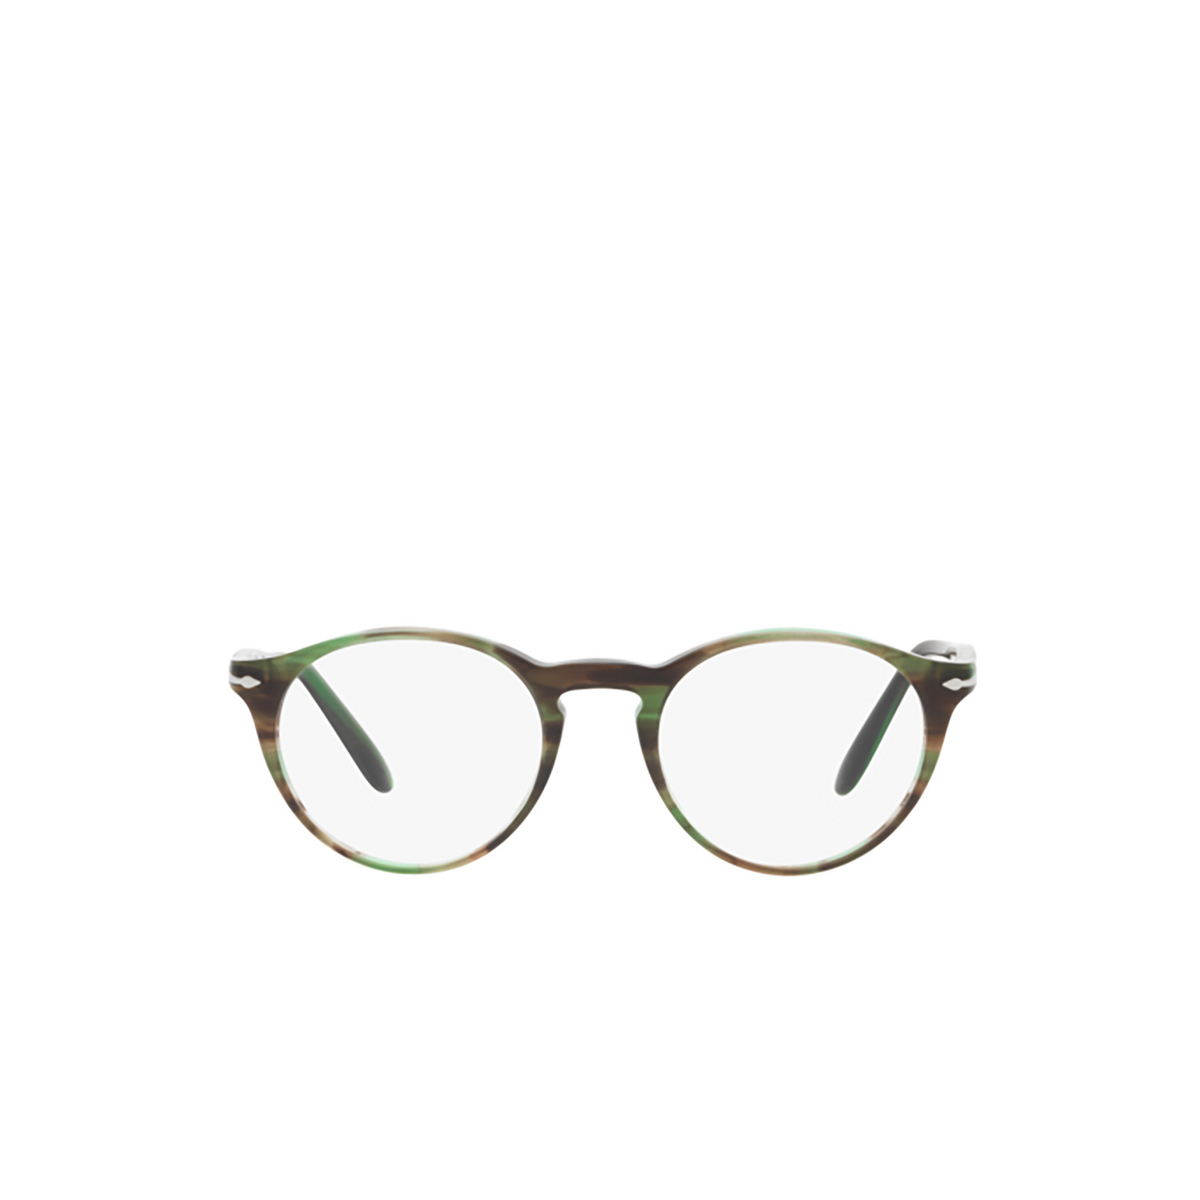 Persol PO3092V Eyeglasses 9067 Striped Green - front view